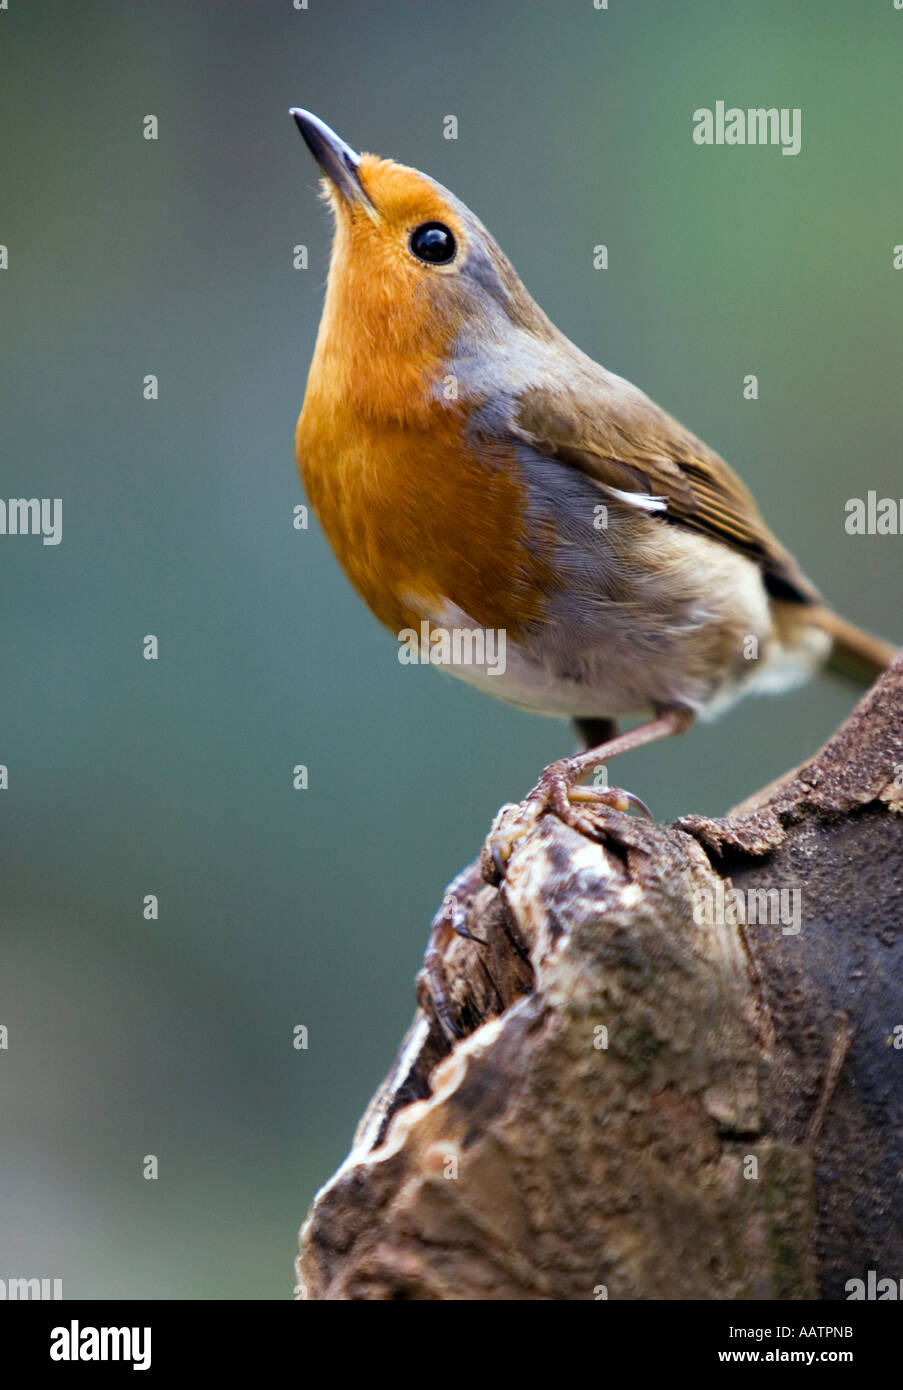 Robin standing on old tree stump looking up Stock Photo